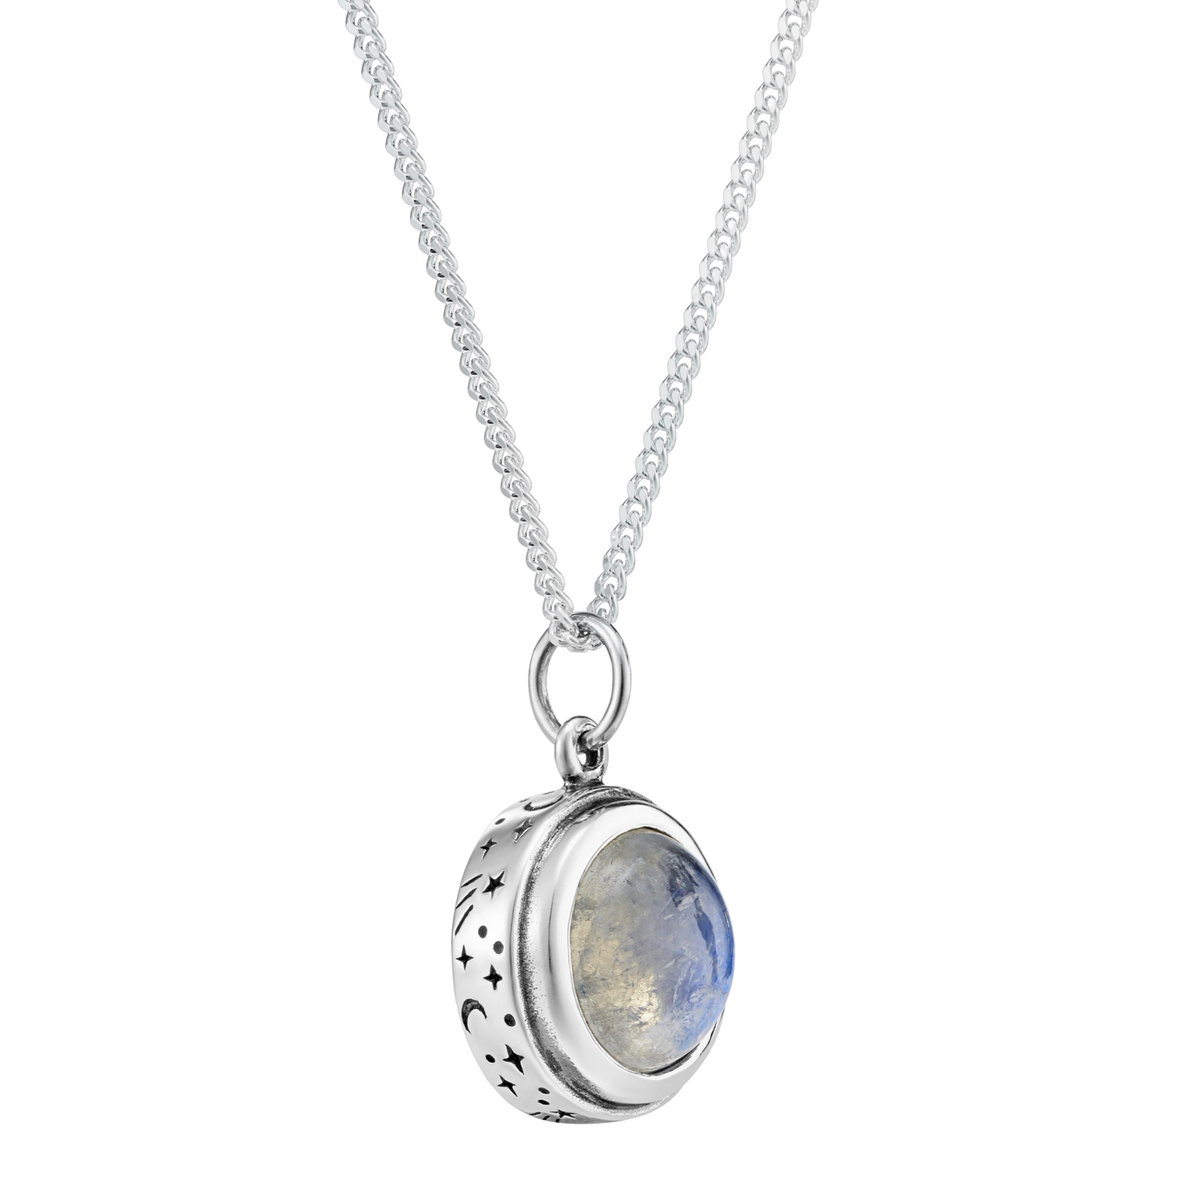 STARRY SKIES - Moonstone & Sterling Silver Necklace